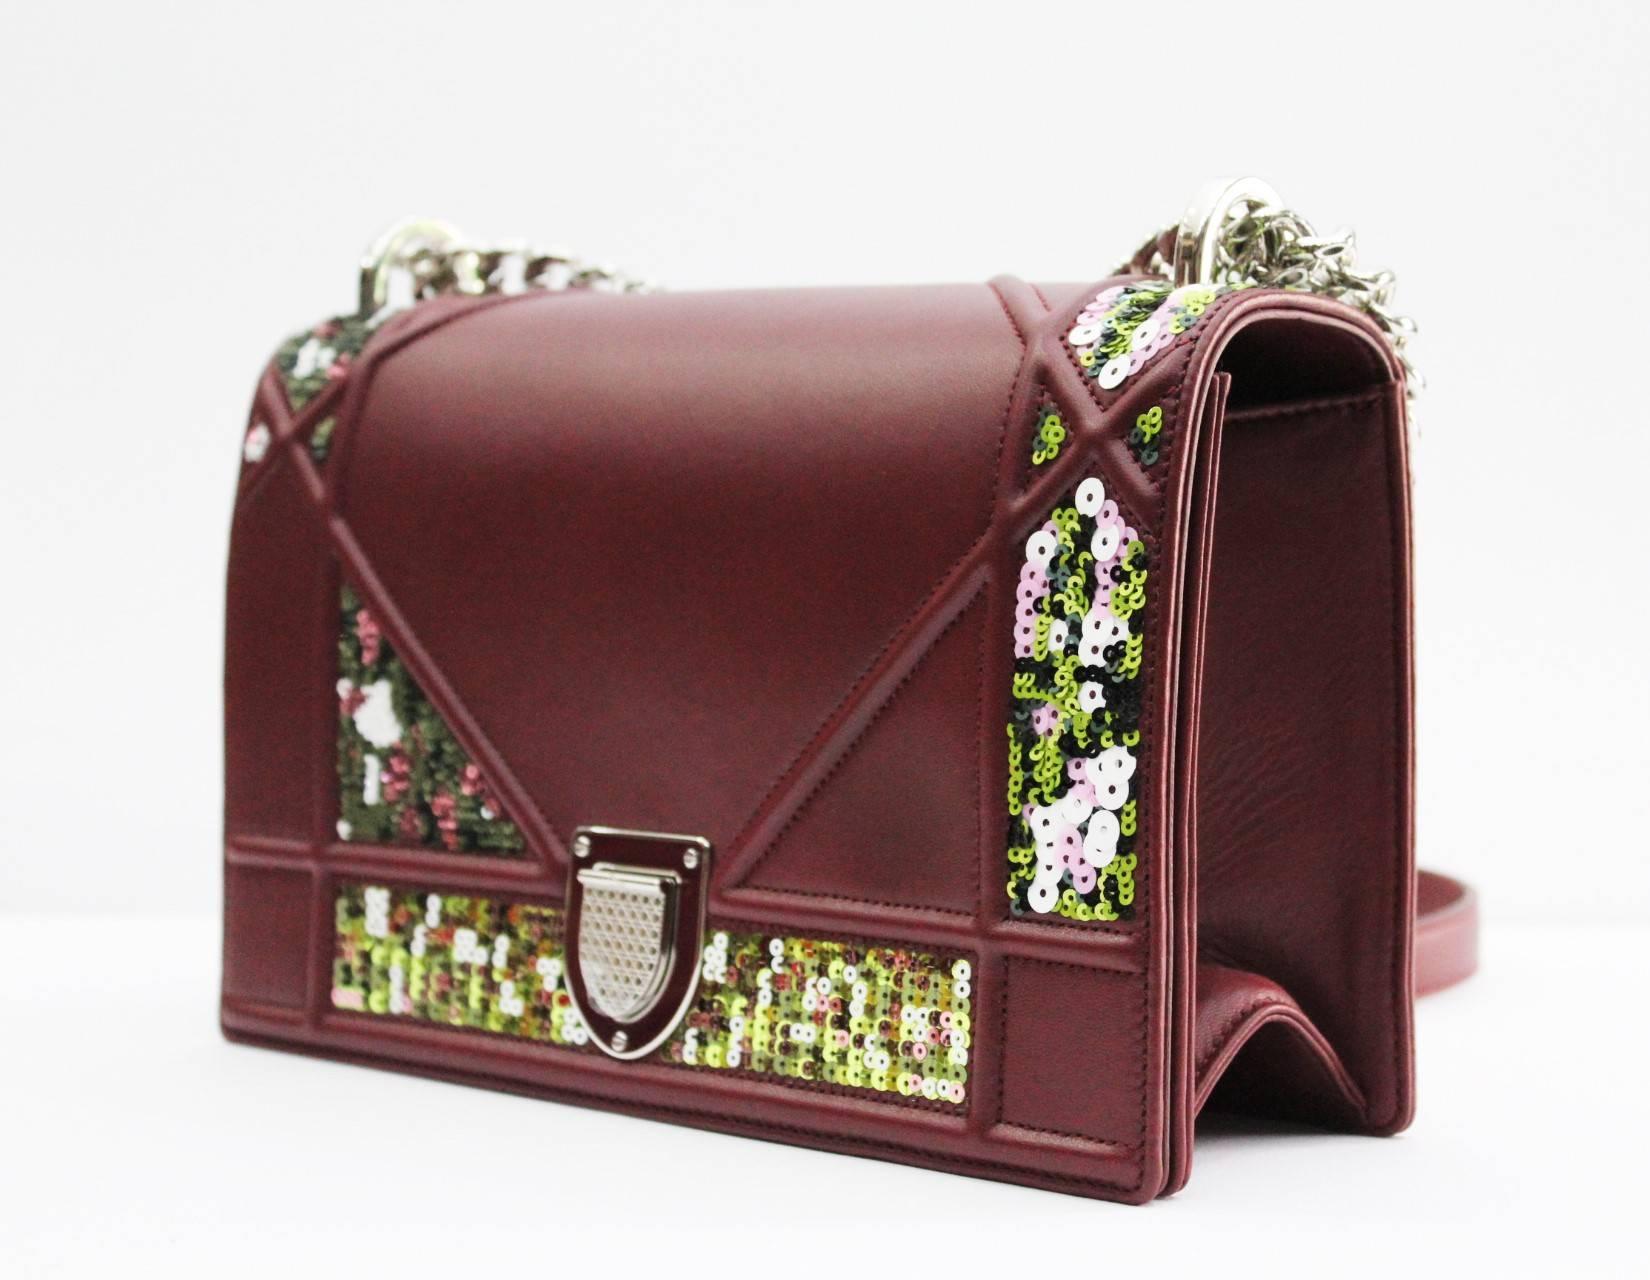 Fantastic Christian Dior bag from tha family Diorama. It is in lambskin leather of bordeaux color and funny sequins.